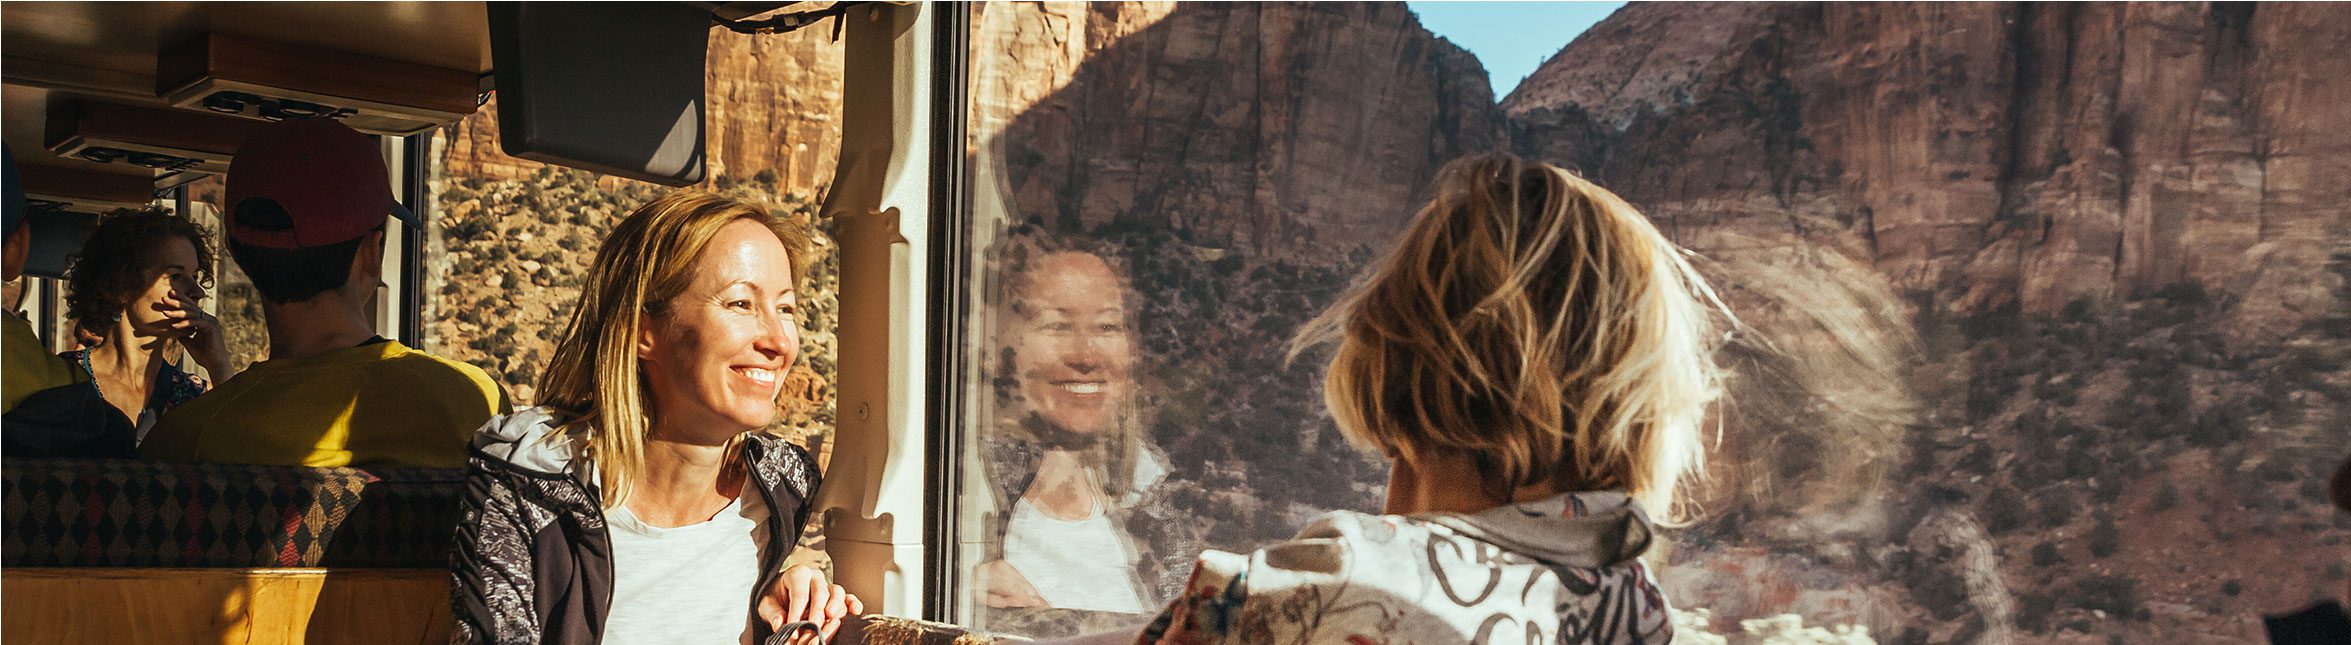 Reflections of a woman smiling in the windows of a Green Tortoise adventure coach.